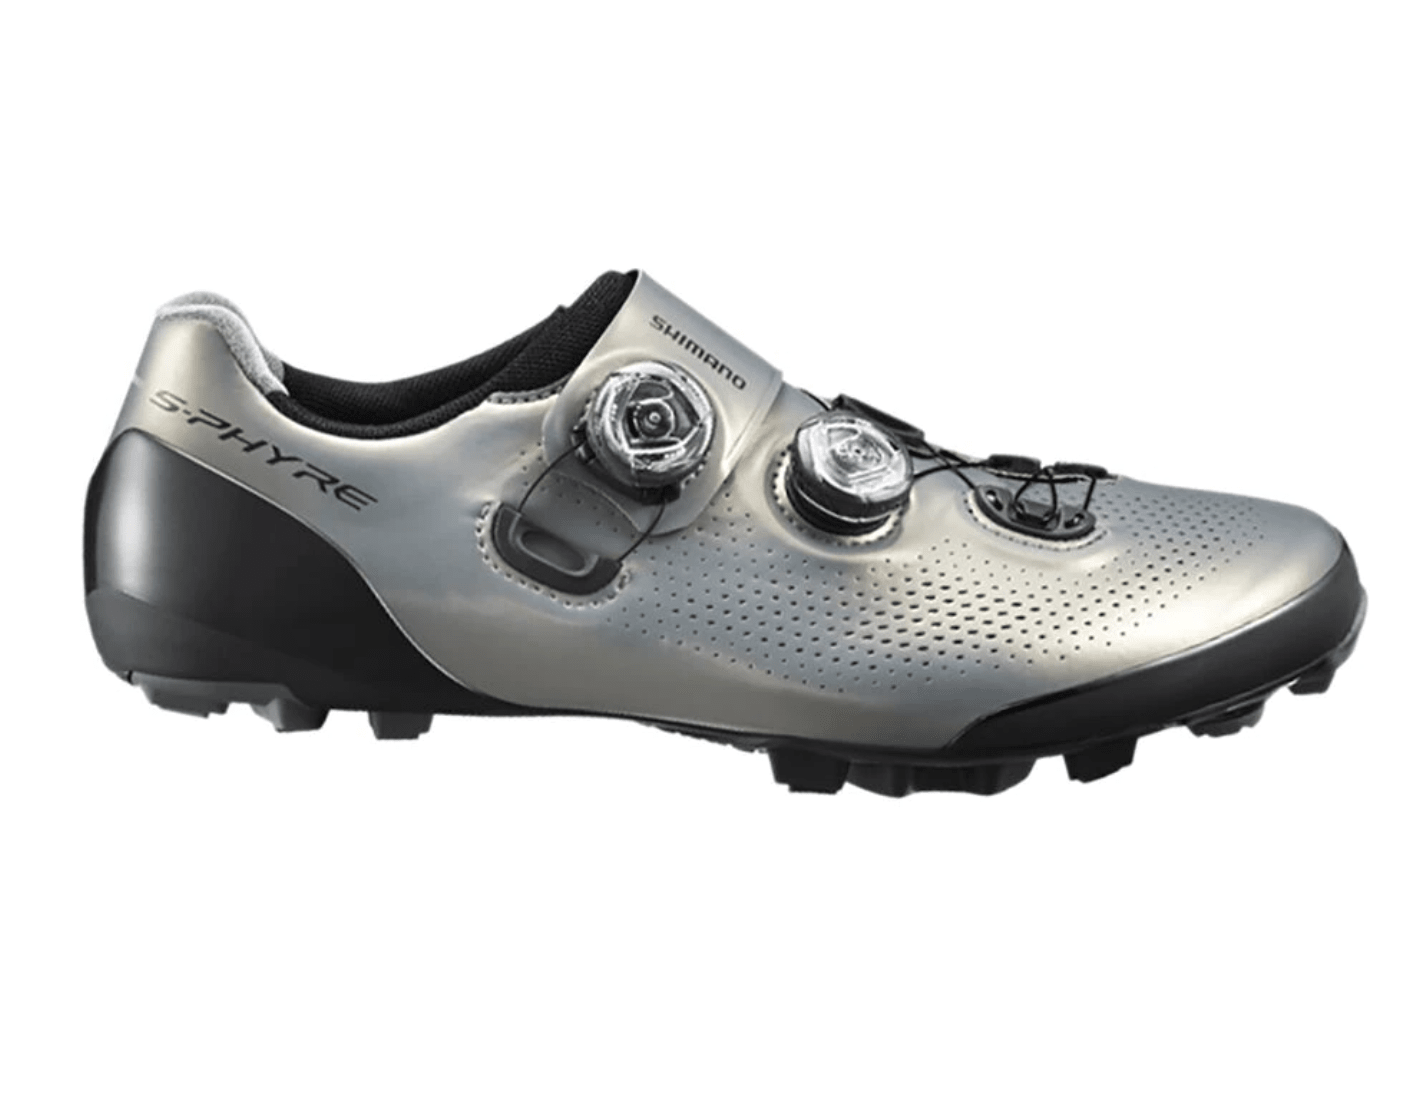 Athletic Sneakers Ultralight Professional Road Cycling Bike Bicycle Shoes SPD SL Look Non Slip PVC and Superfiber Air Mesh Indoor Fitness Riding Shoes 